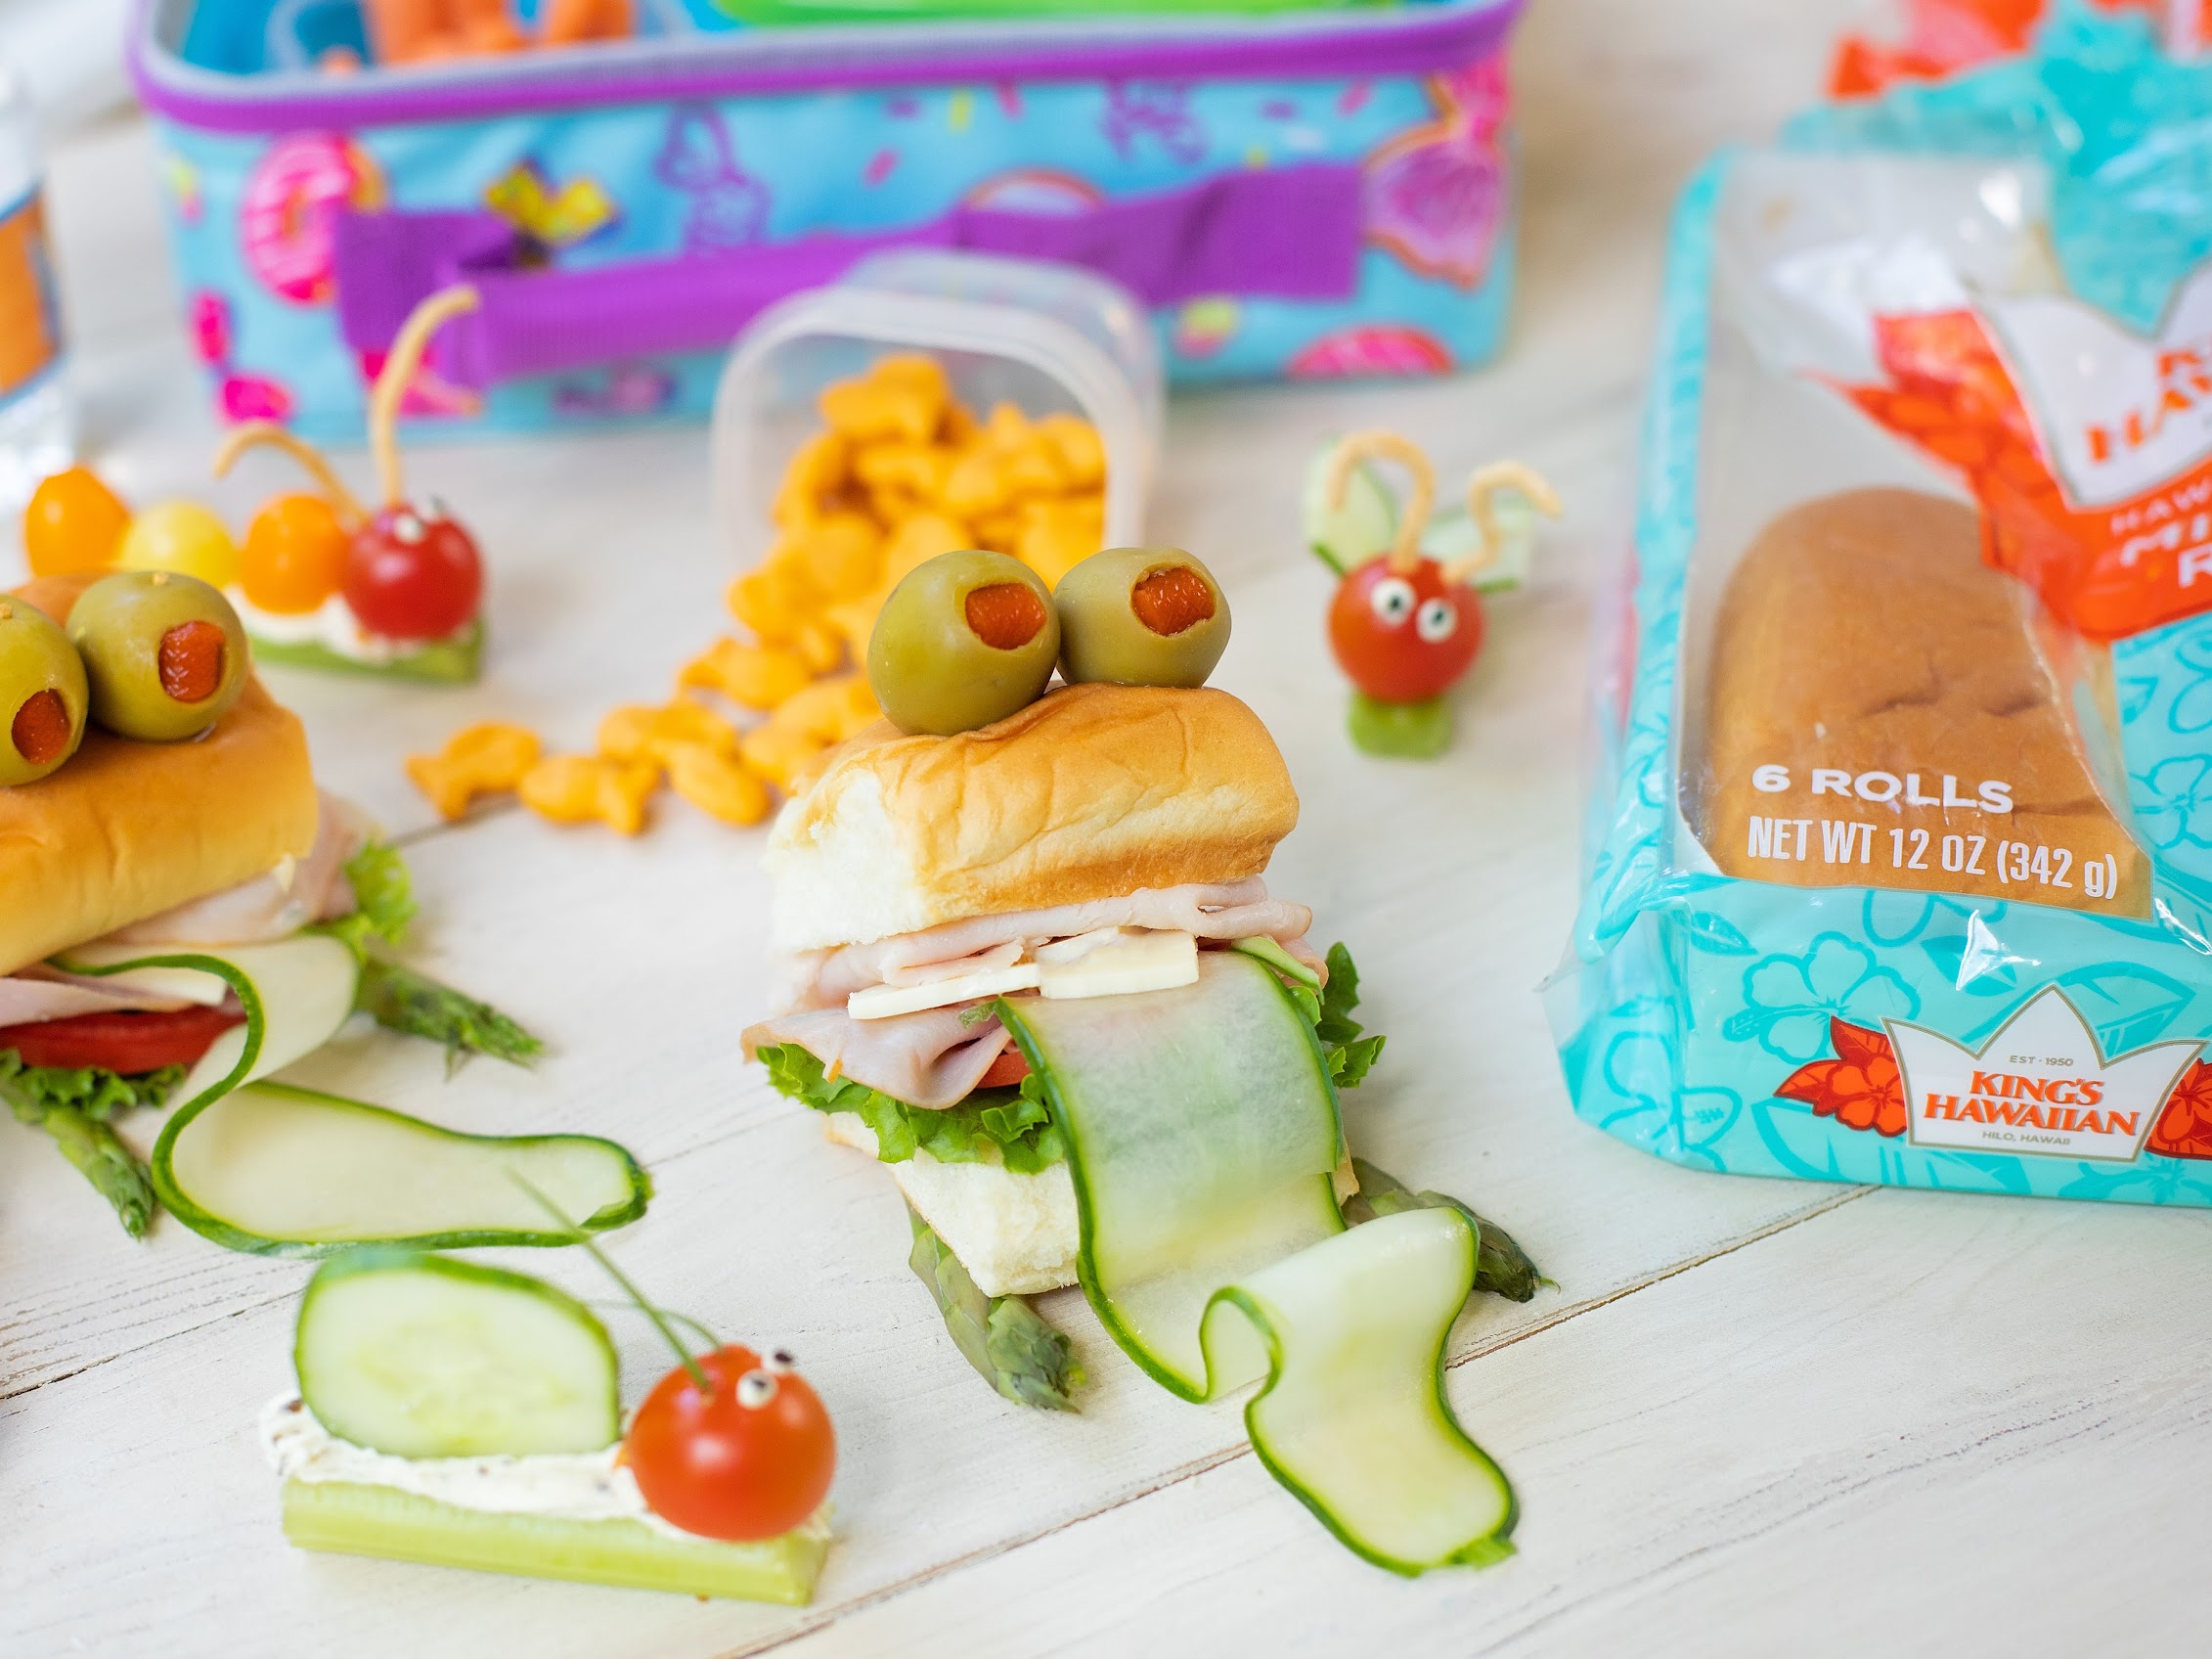 Back To School Is More Fun With This Toad-ally Awesome Mini Club Sub On King's Hawaiian - Each Purchase Supports The No Kid Hungry Campaign on I Heart Publix 1